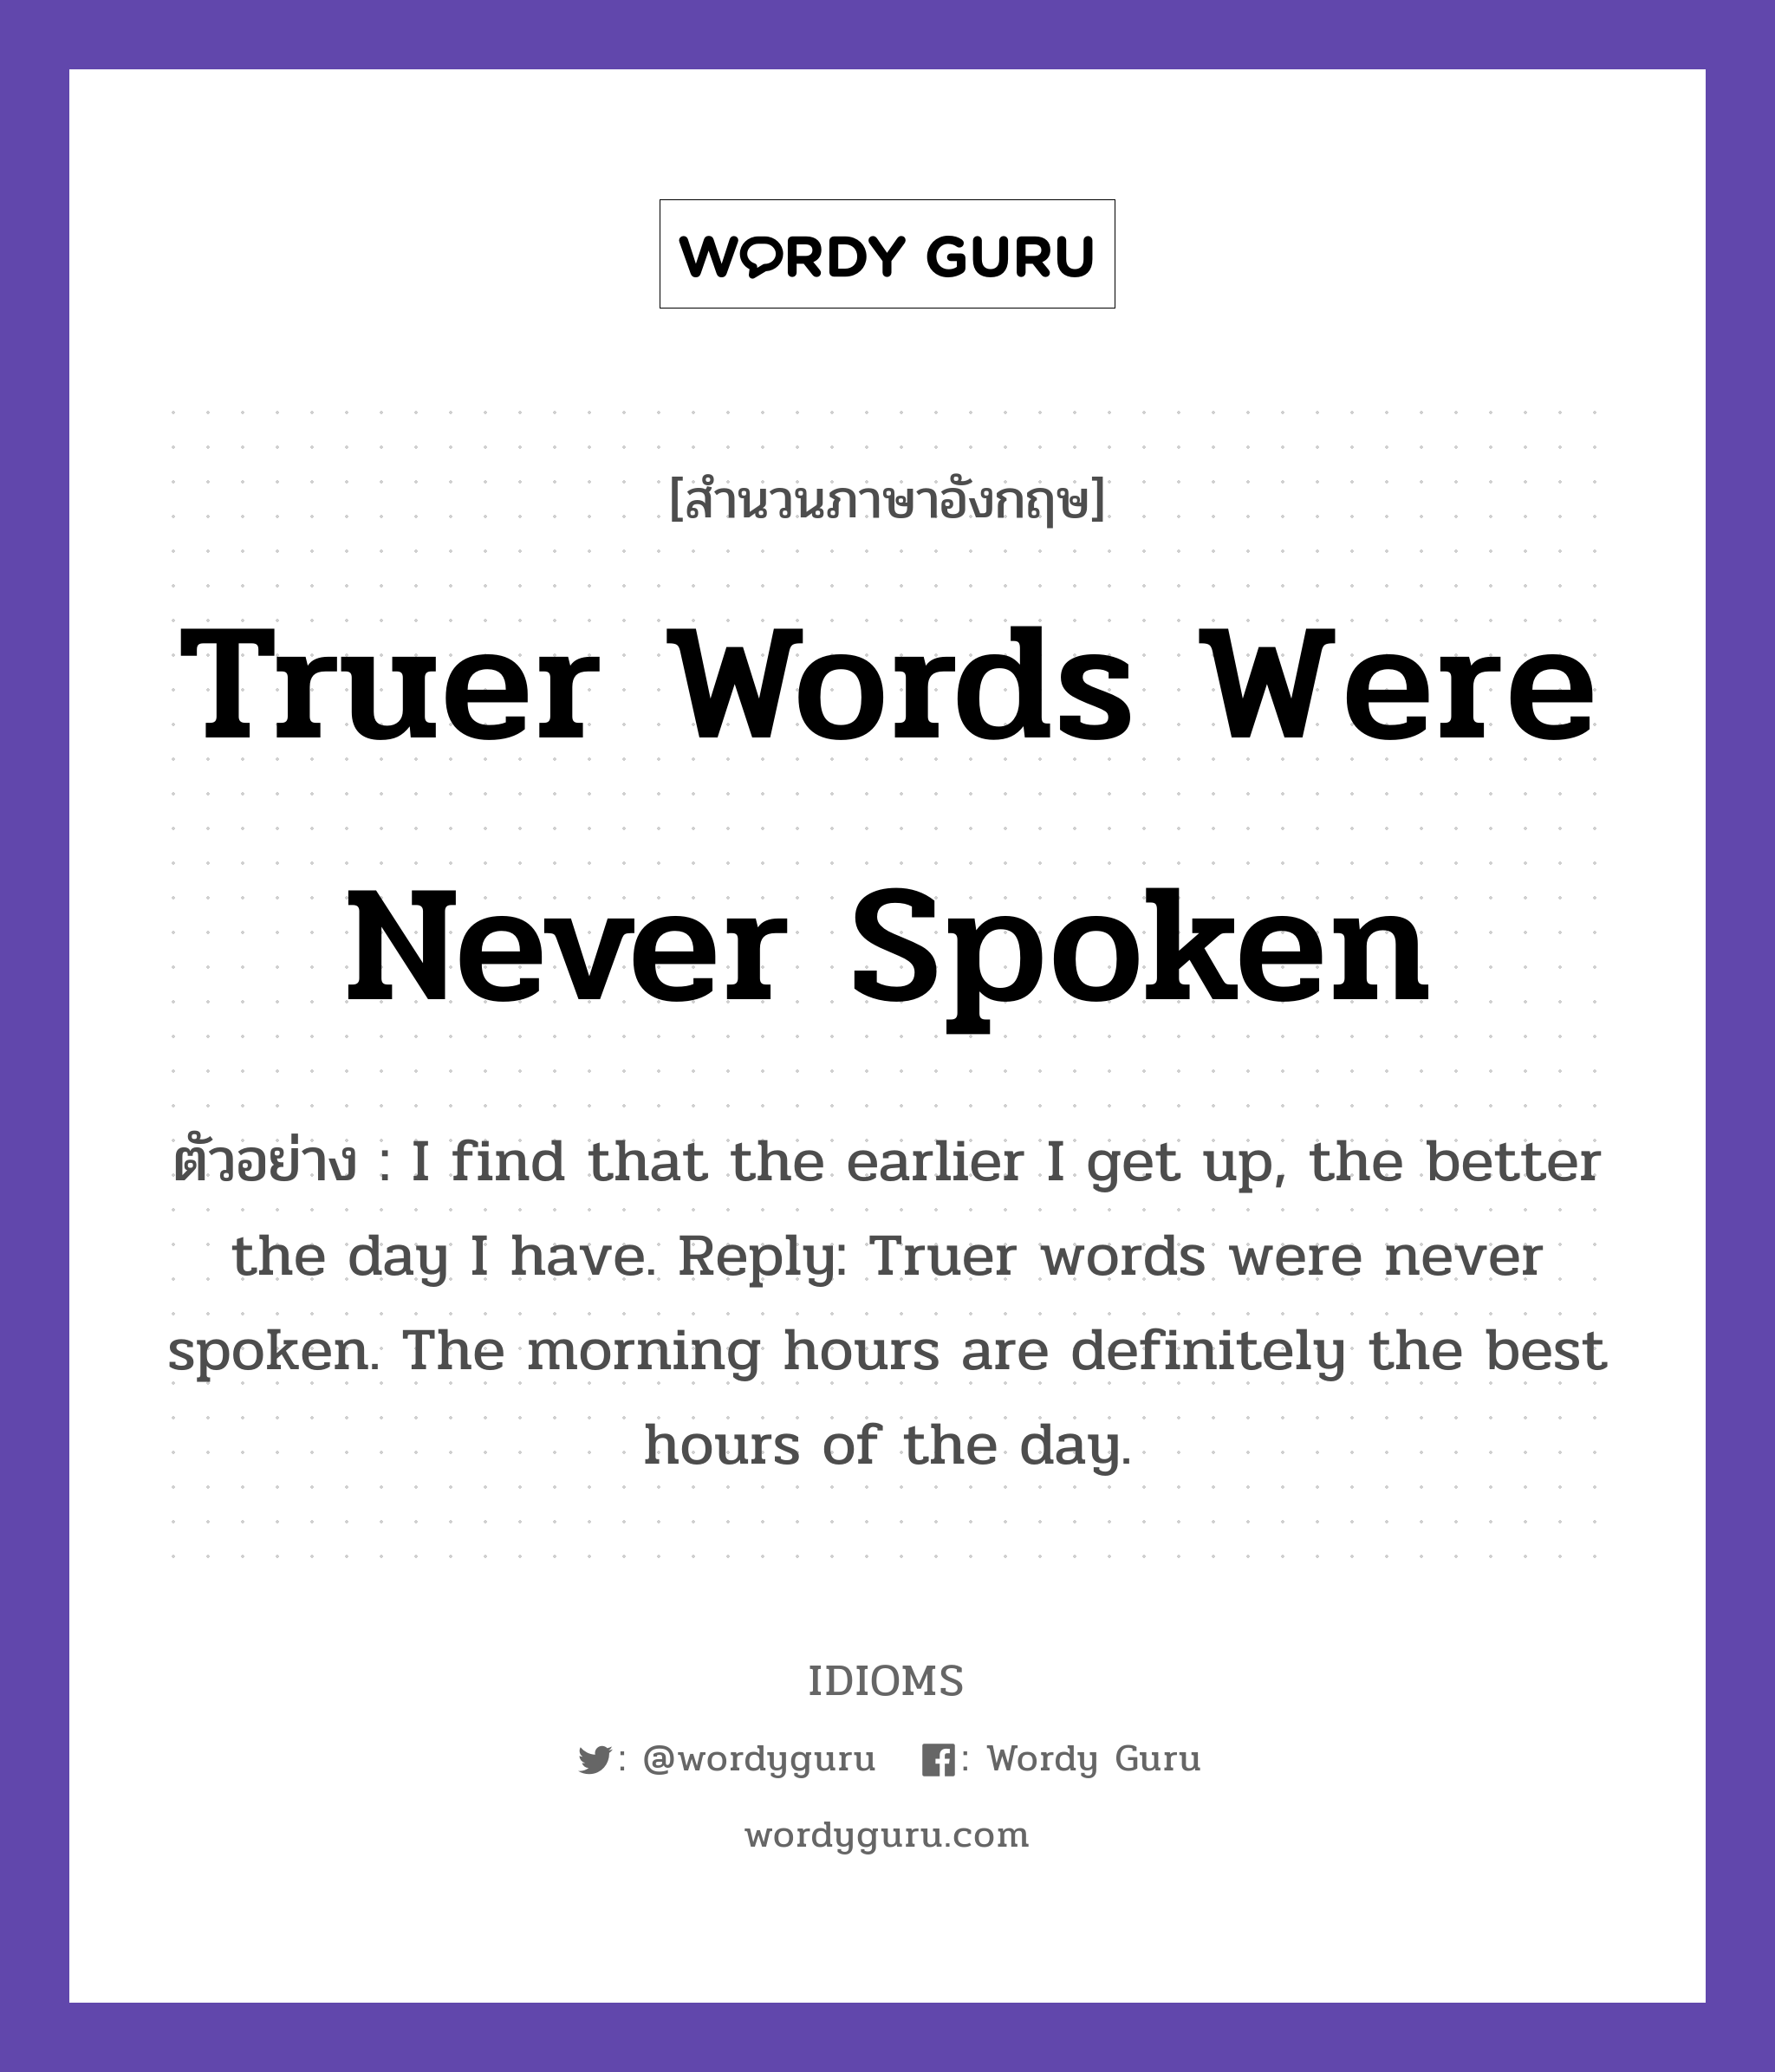 Truer Words Were Never Spoken แปลว่า?, สำนวนภาษาอังกฤษ Truer Words Were Never Spoken ตัวอย่าง I find that the earlier I get up, the better the day I have. Reply: Truer words were never spoken. The morning hours are definitely the best hours of the day.